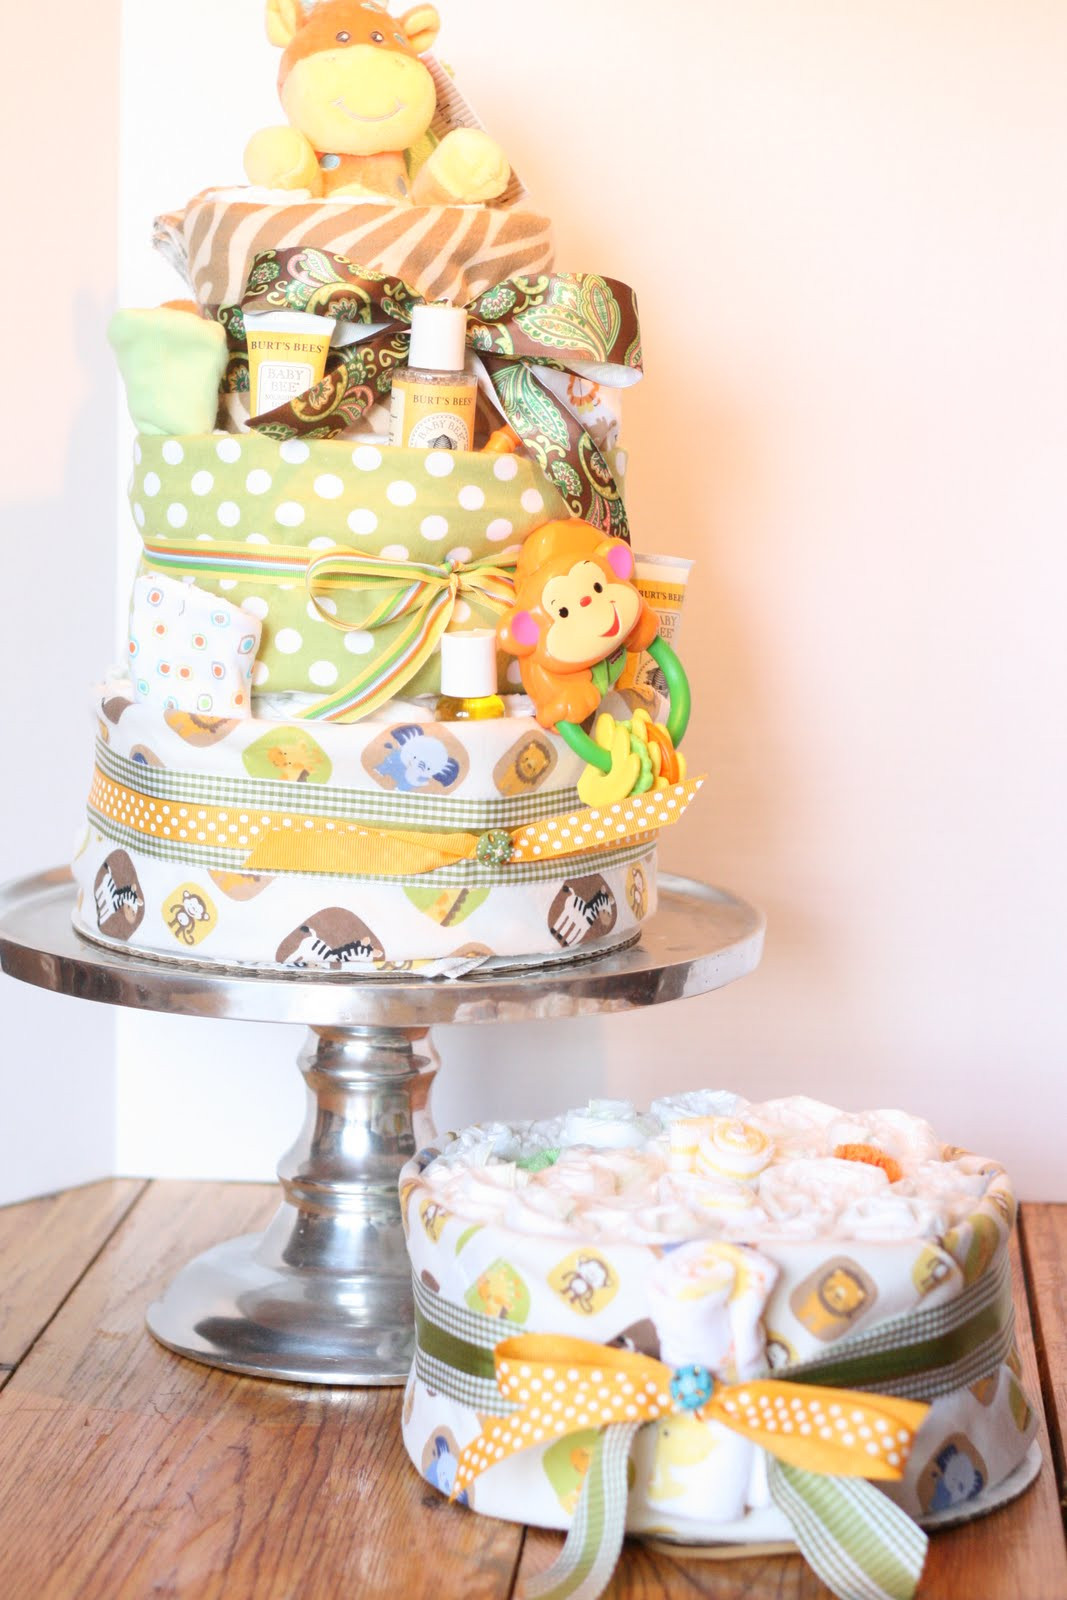 DIY Baby Gifts Ideas
 25 DIY Baby Shower Gifts for the Little Boy on the Wa